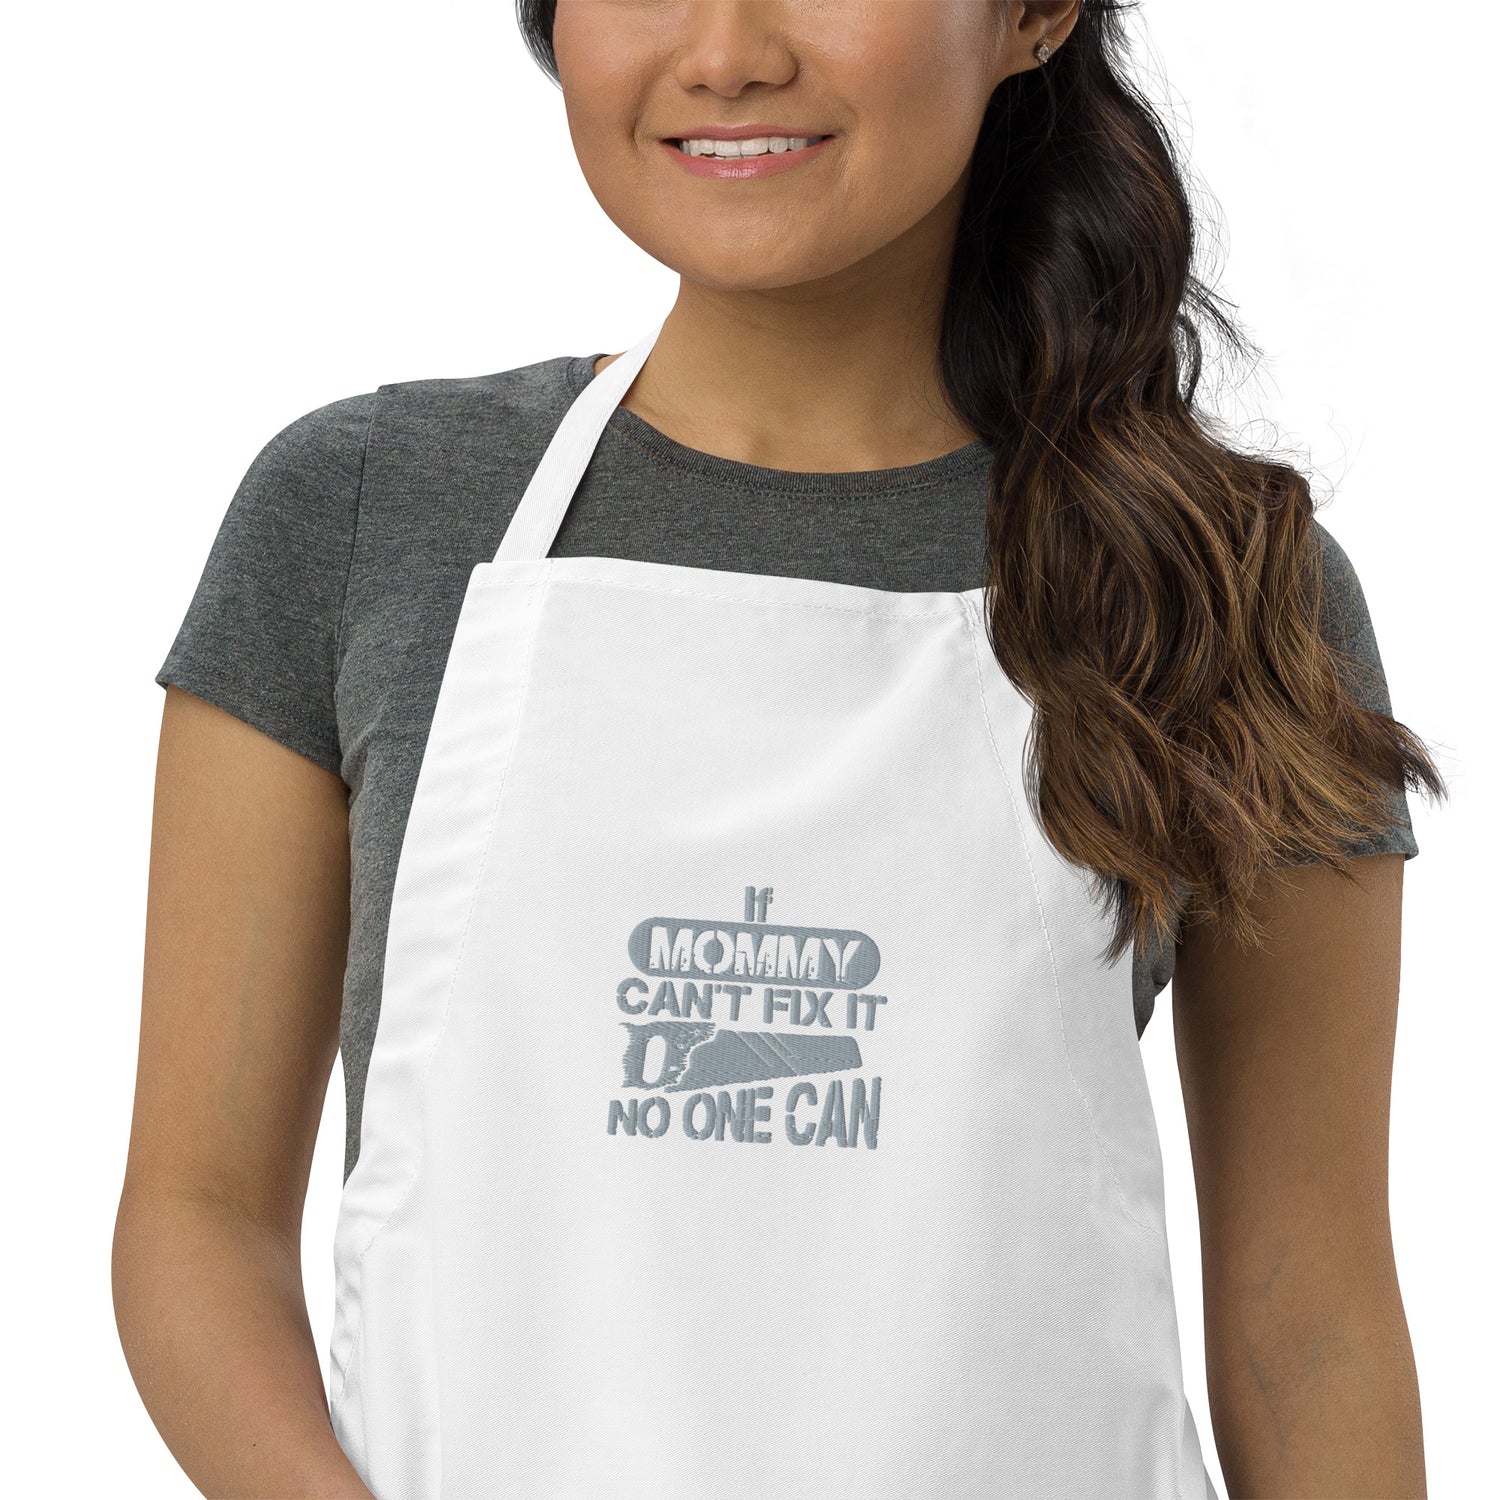 Embroidered White Apron With Chef Hat / Chef Mommy Apron / Chef